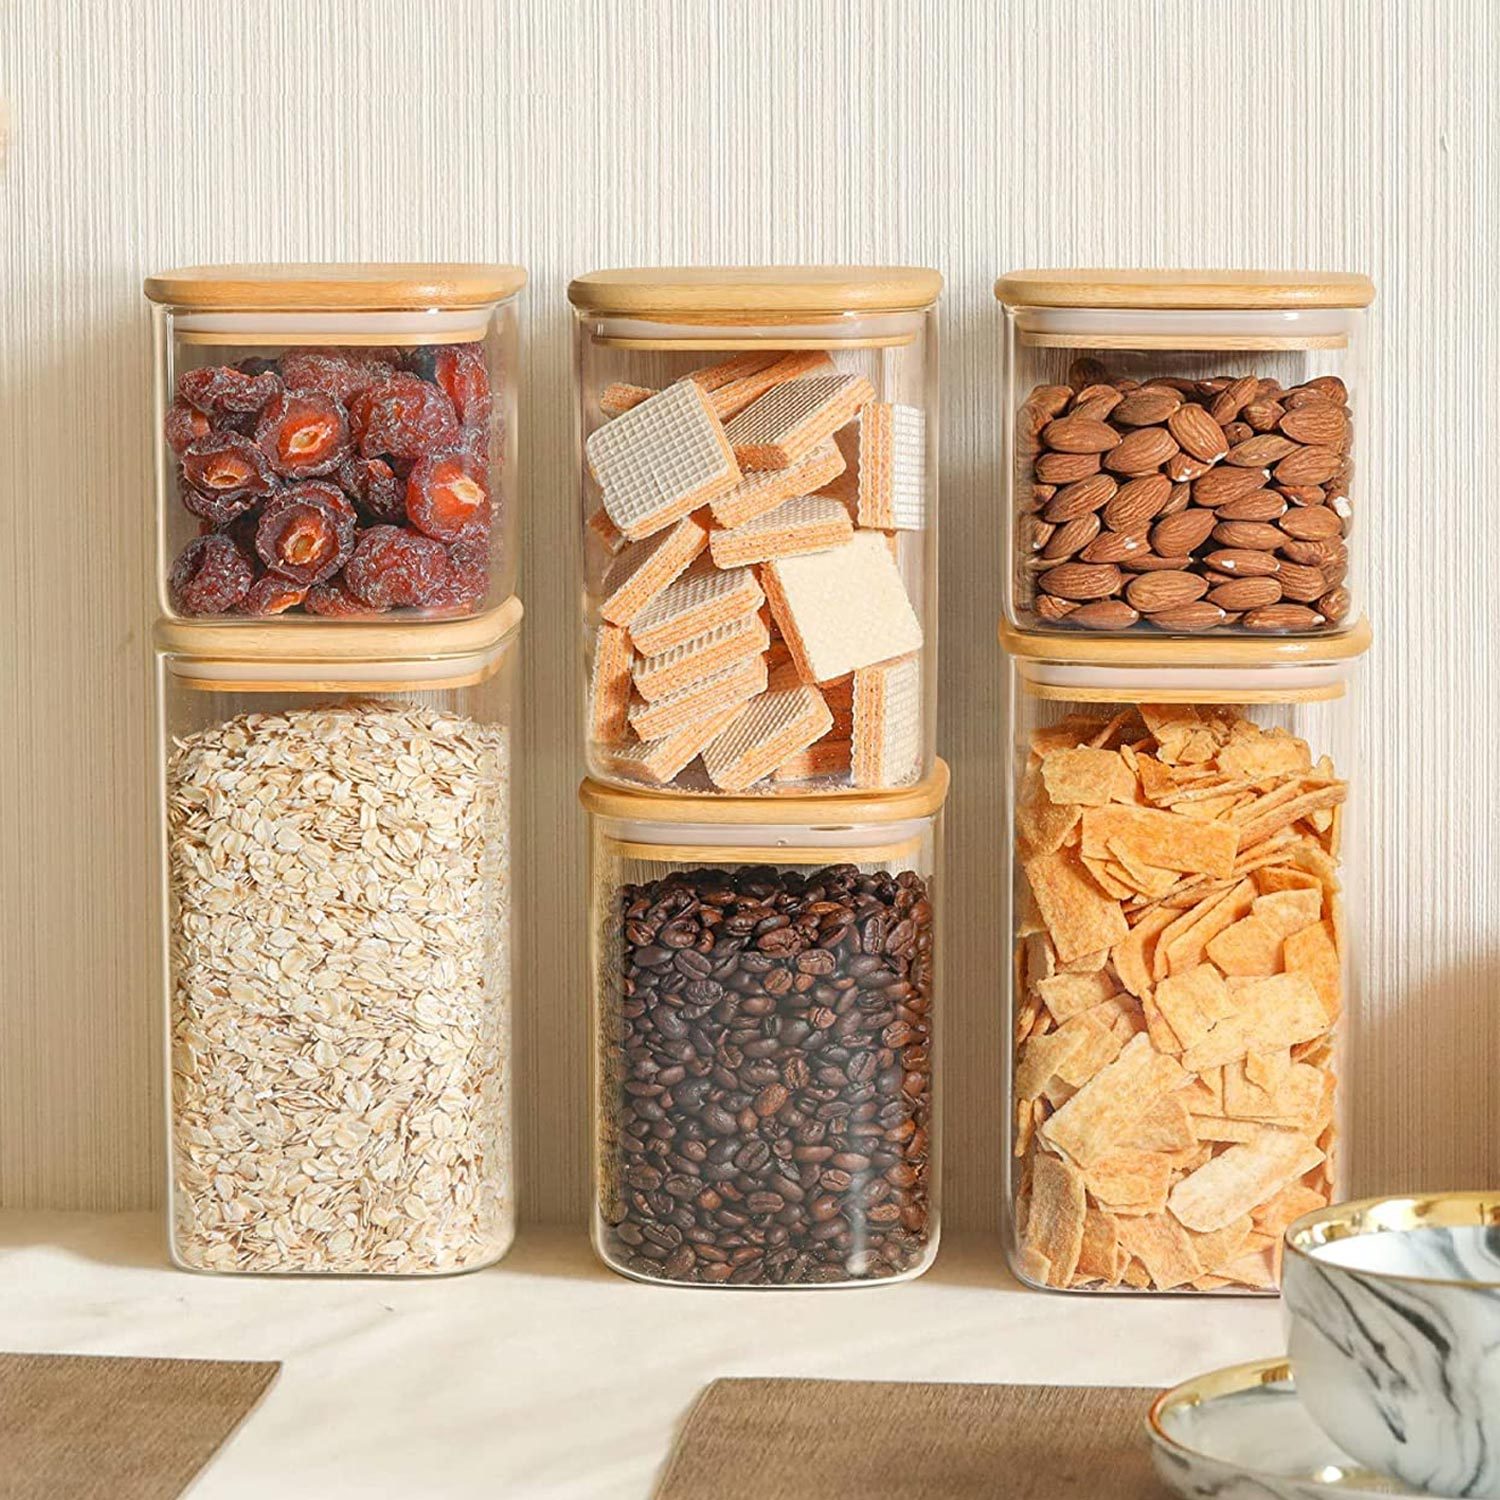 https://www.tasteofhome.com/wp-content/uploads/2021/05/The-8-Best-Pantry-Storage-Containers-of-2023_FT_via-amazon.com_.jpg